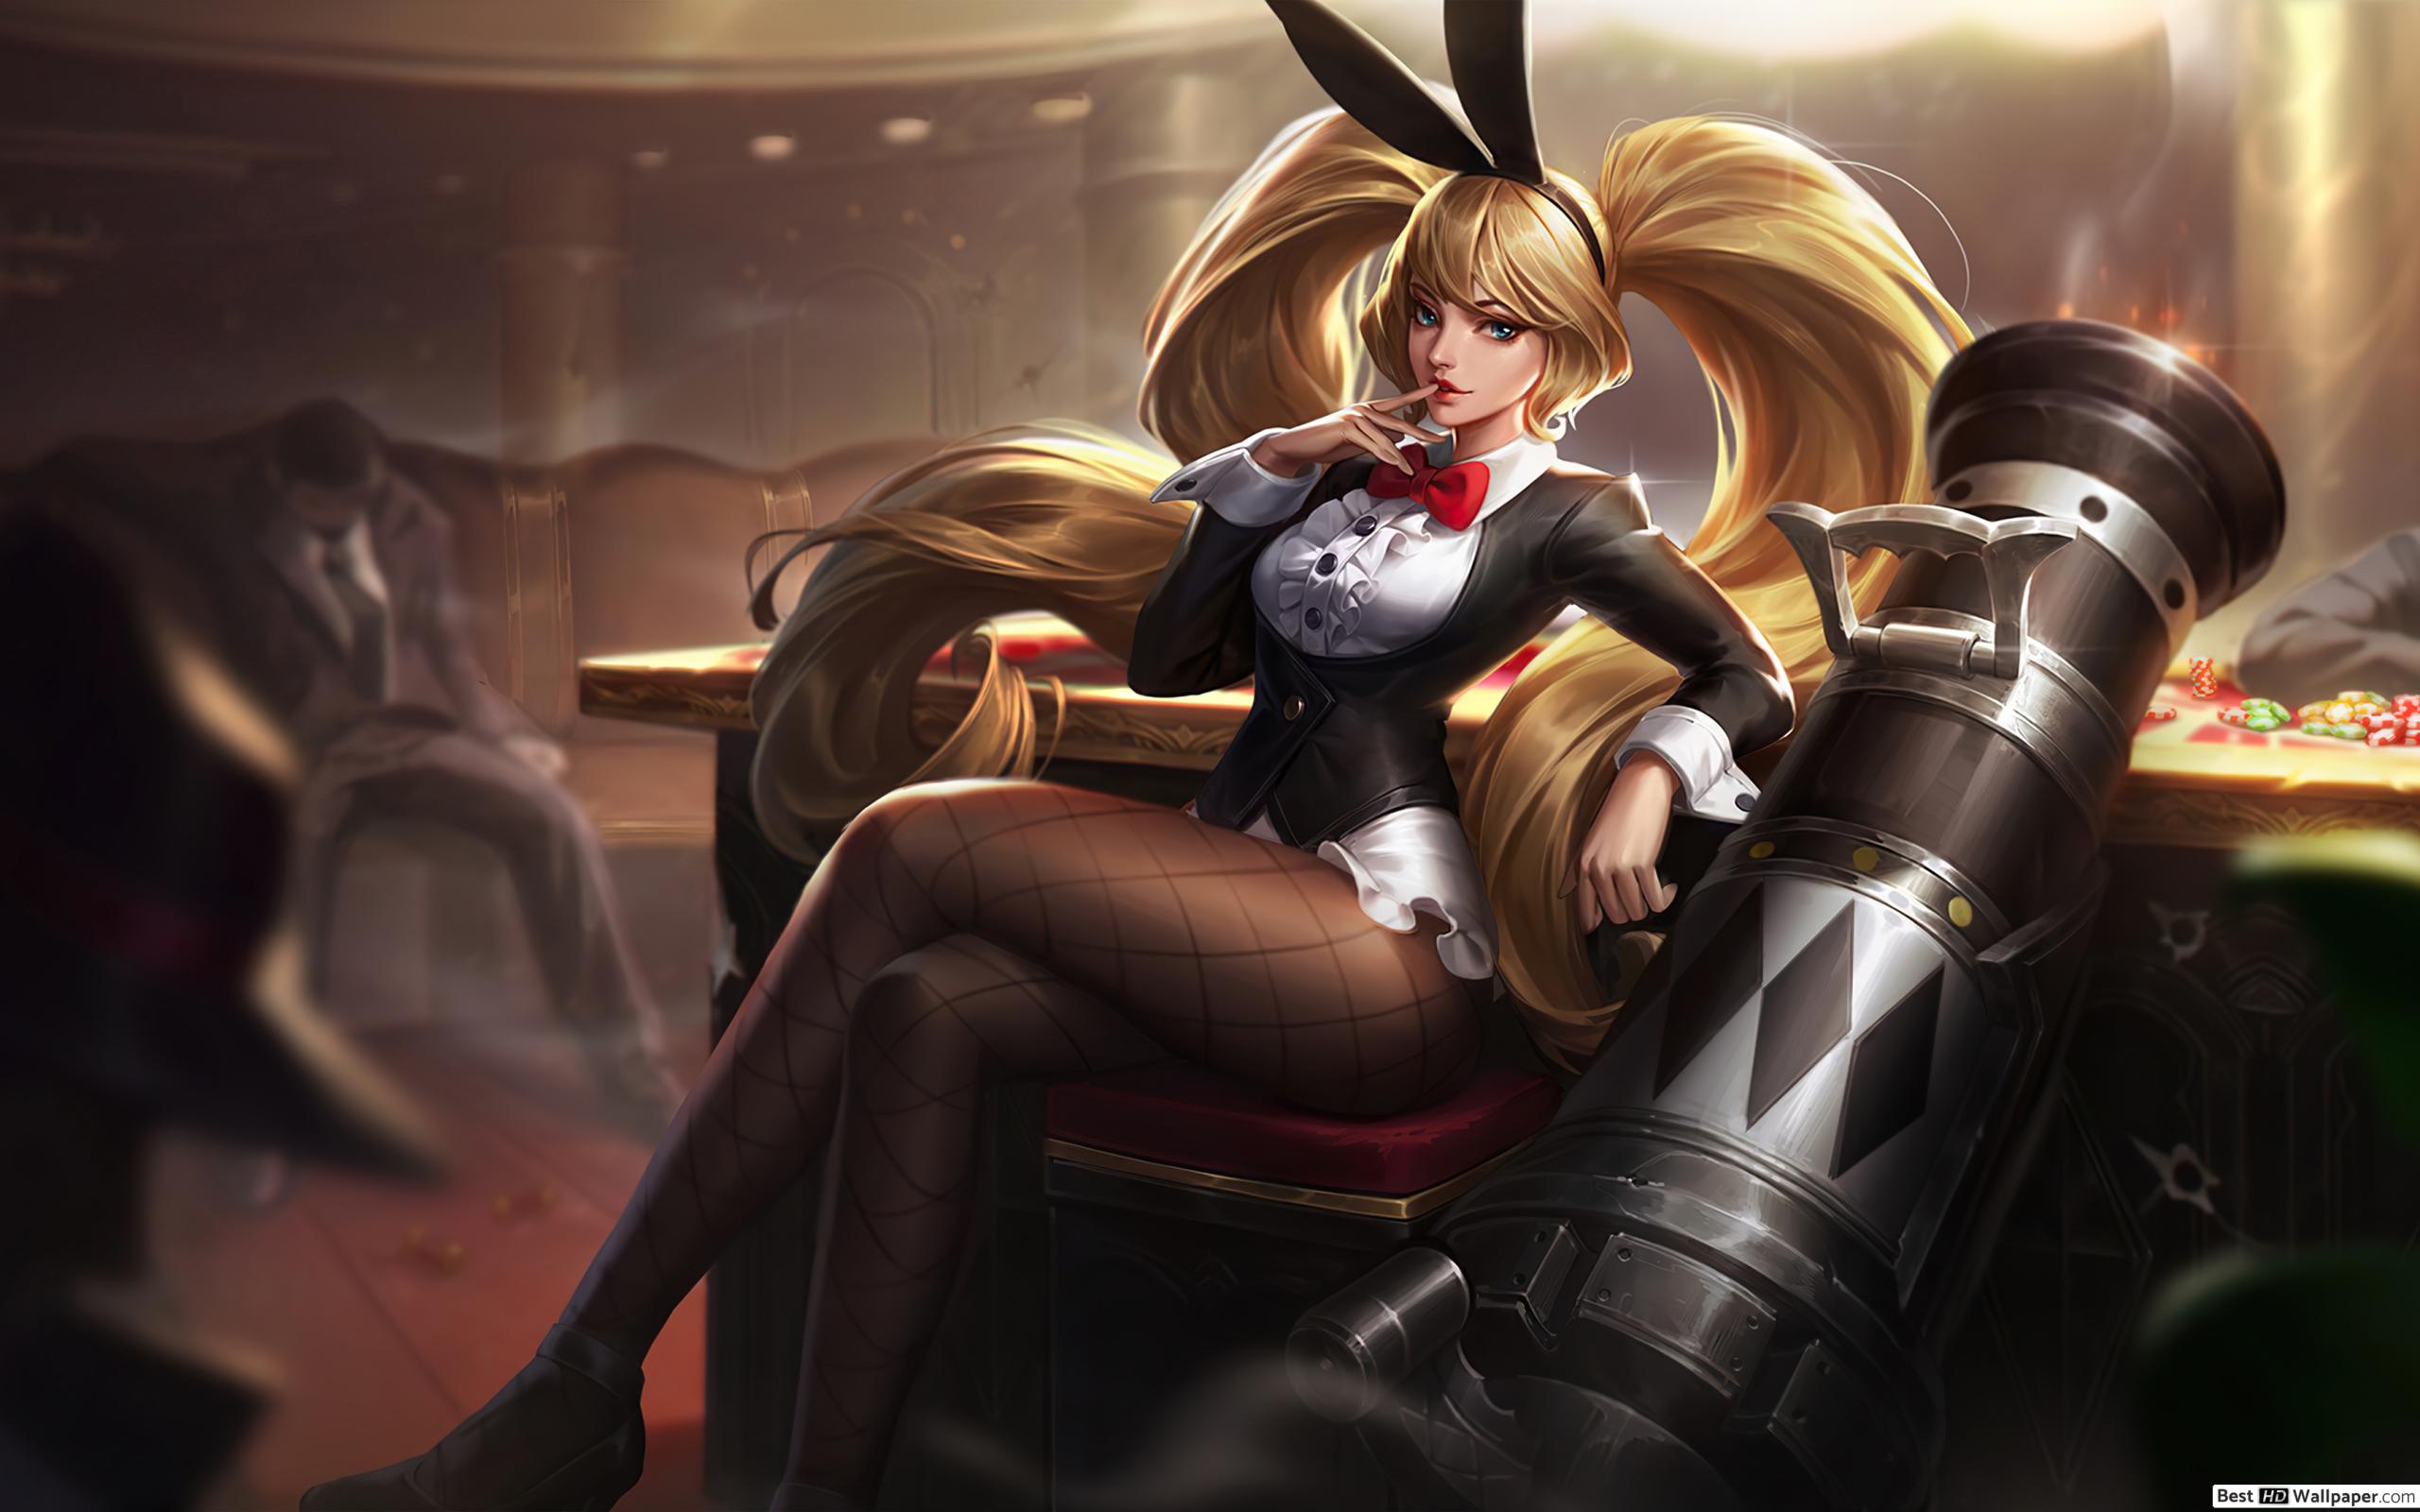 Bunny Babe 'Layla' Legends (ML) HD wallpaper download